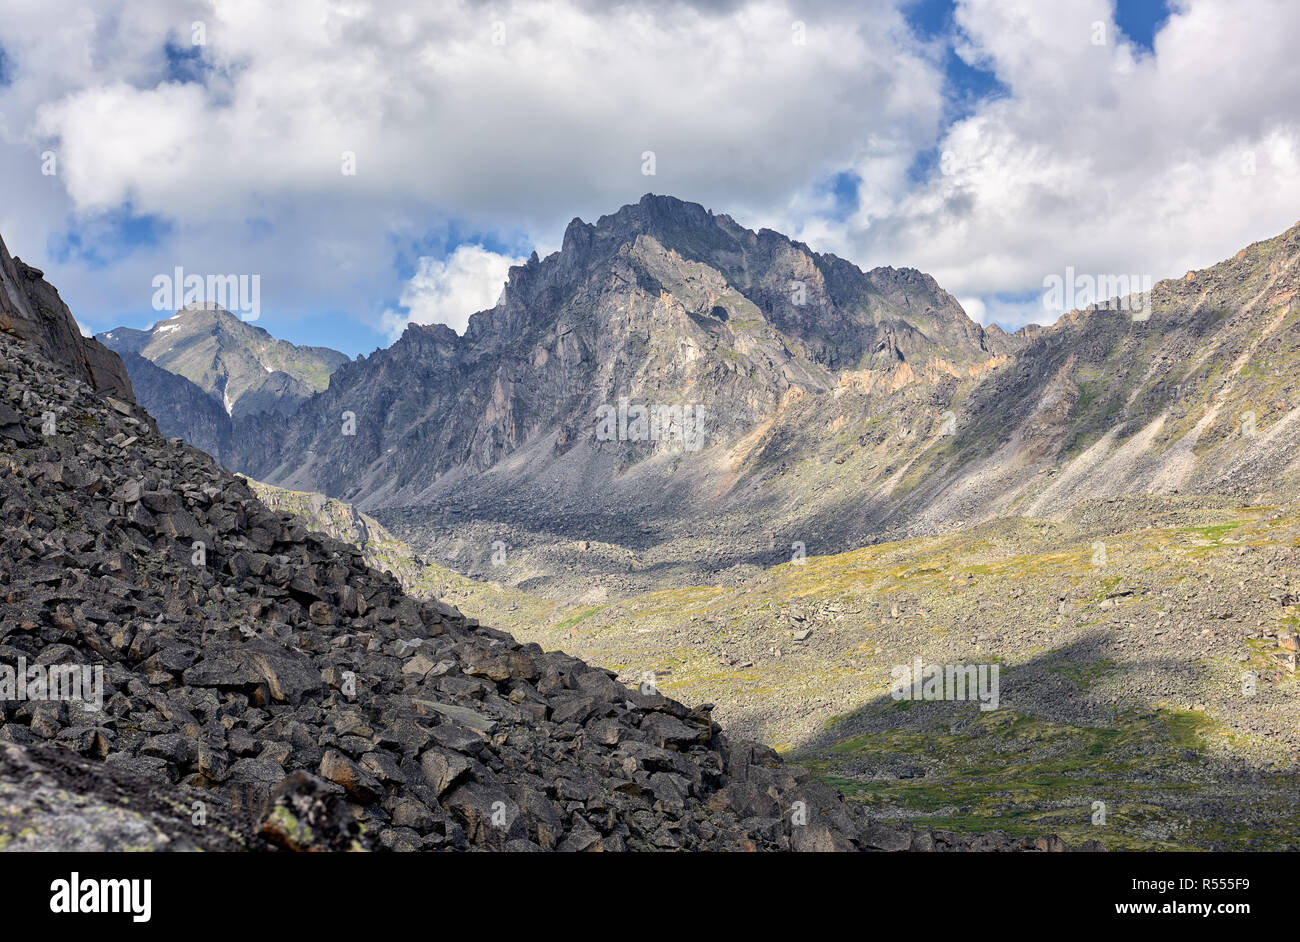 Collapsing peak under the influence of natural weathering erosion. Mountain landscape. Summer day. Central Asian Stock Photo